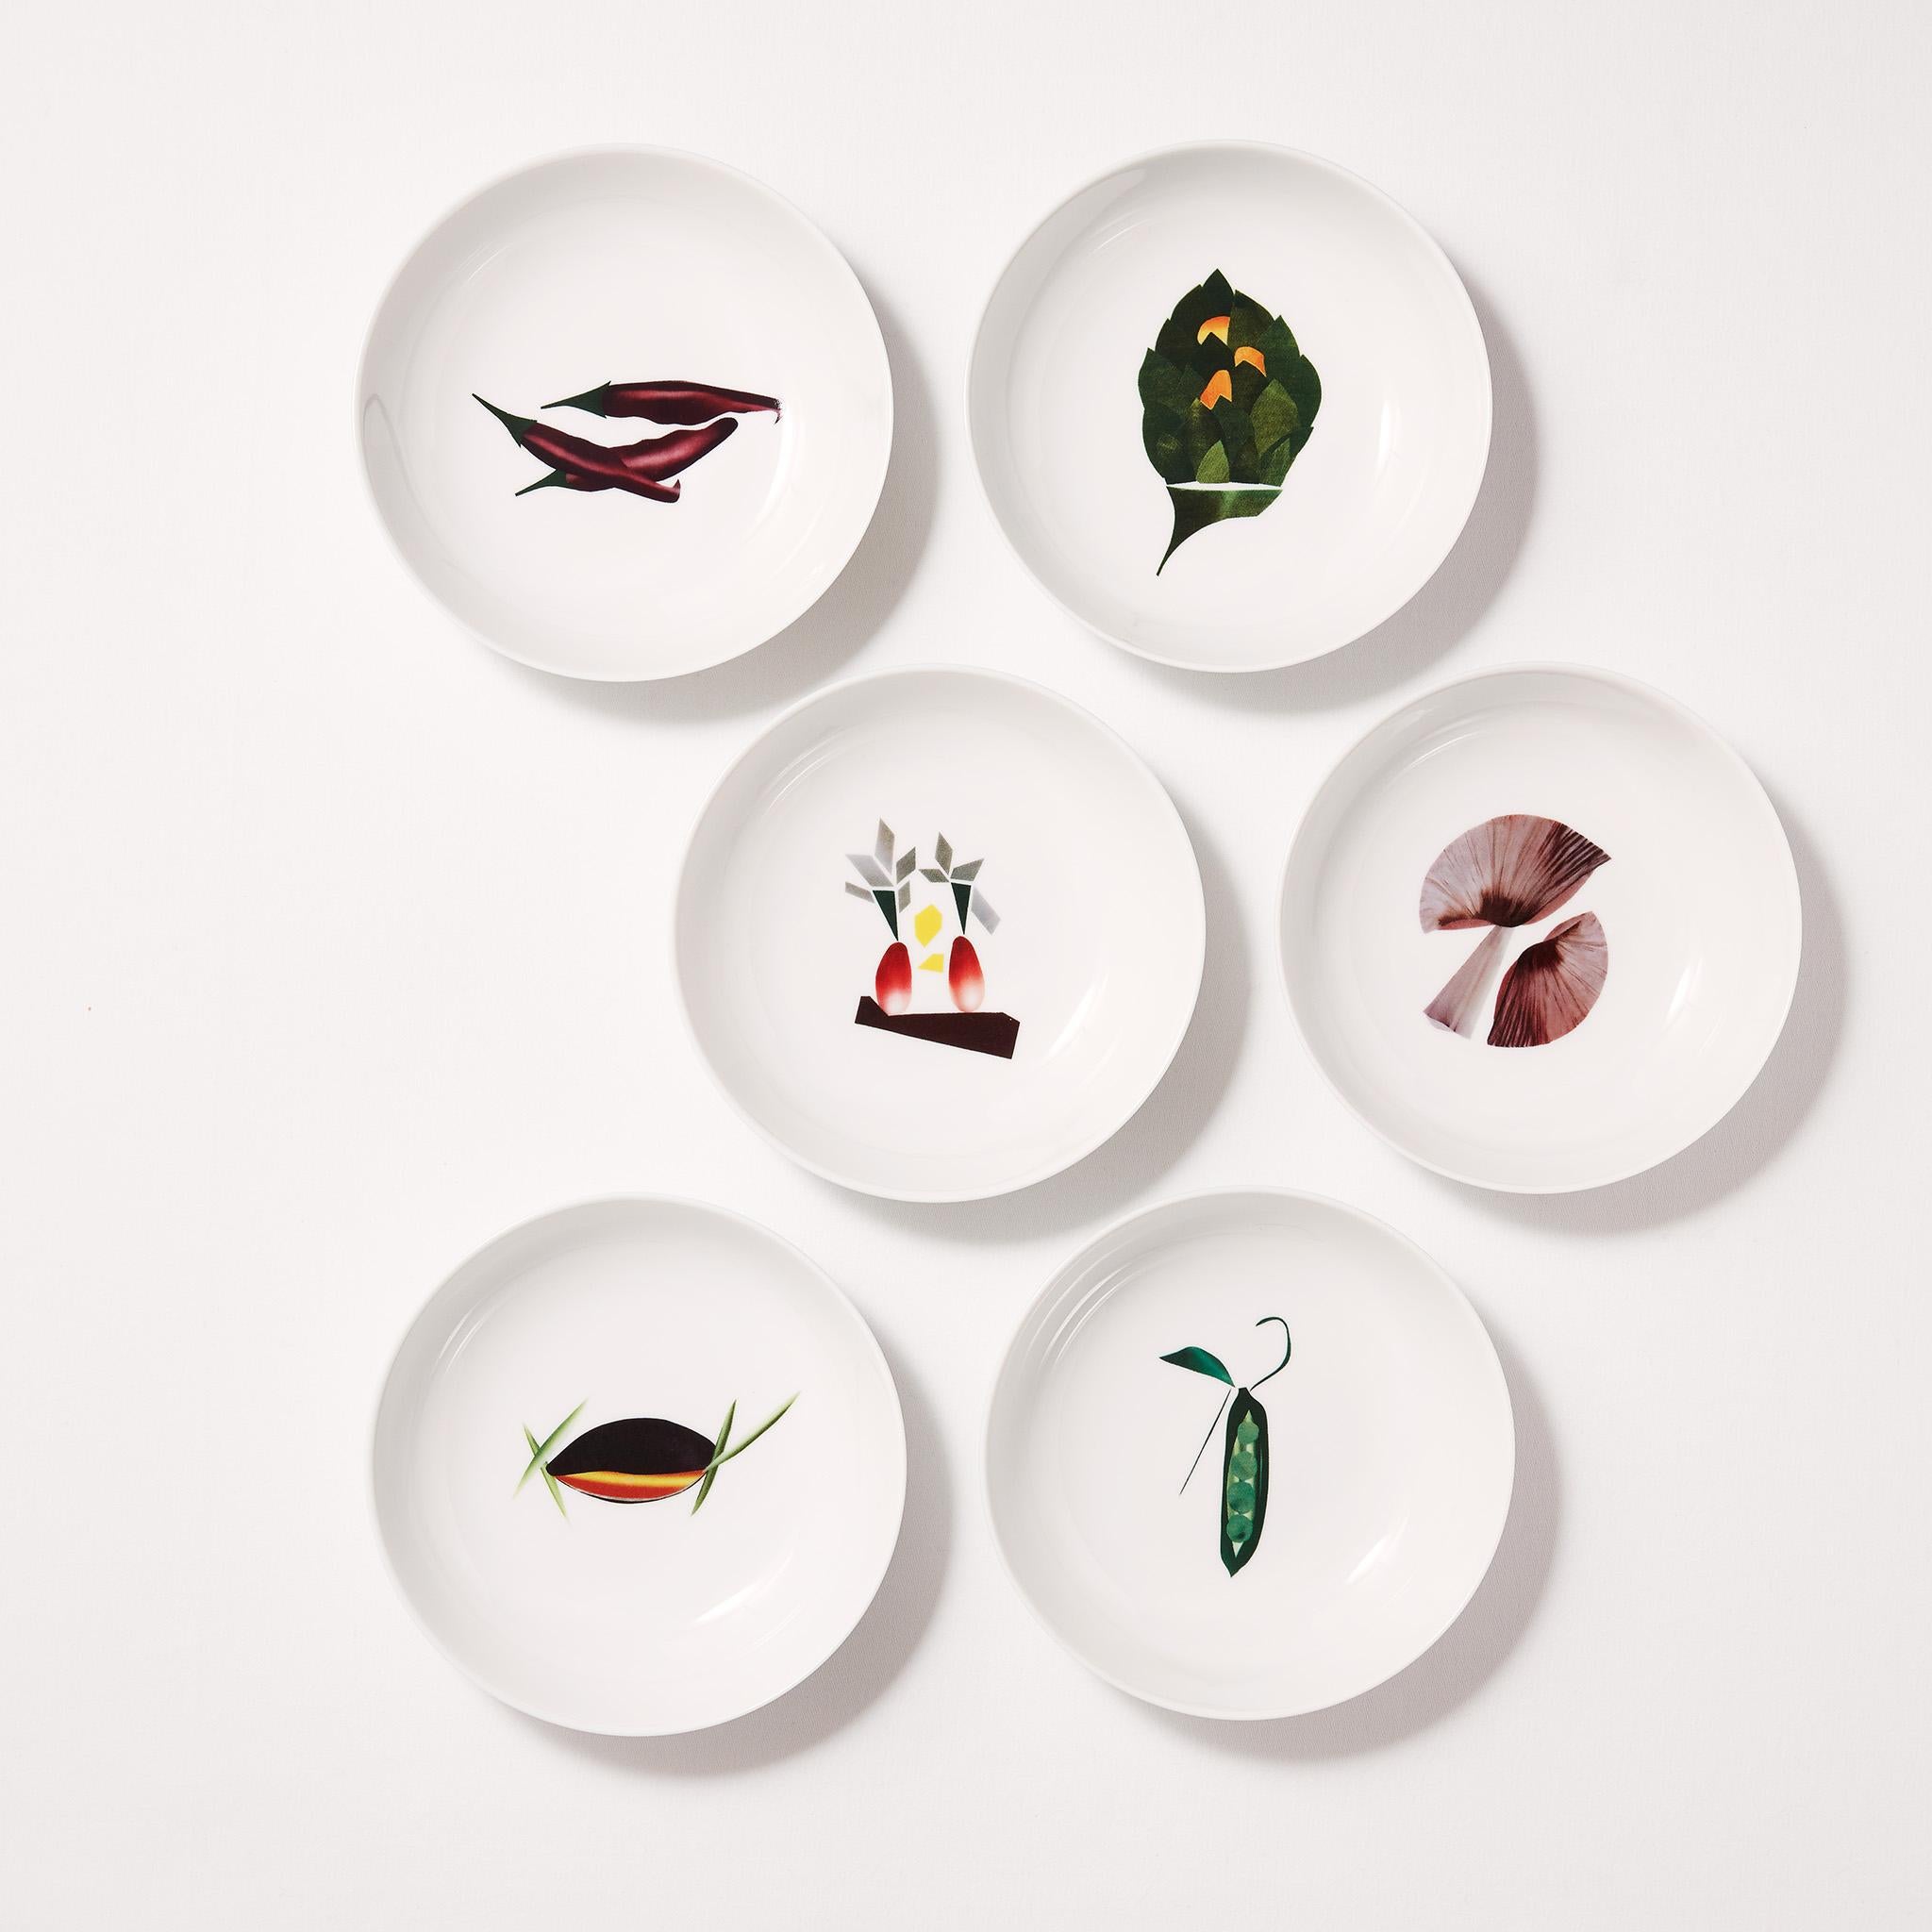 Silk-screened creation of the paper collages of the French Chef Alain Passard. A creation inspired by his recipe of peas with Sorrel.
From mineral porcelain to vegetable recipes, this bowl is an Ode to Dame Nature.

Bowl that adapts to all forms of